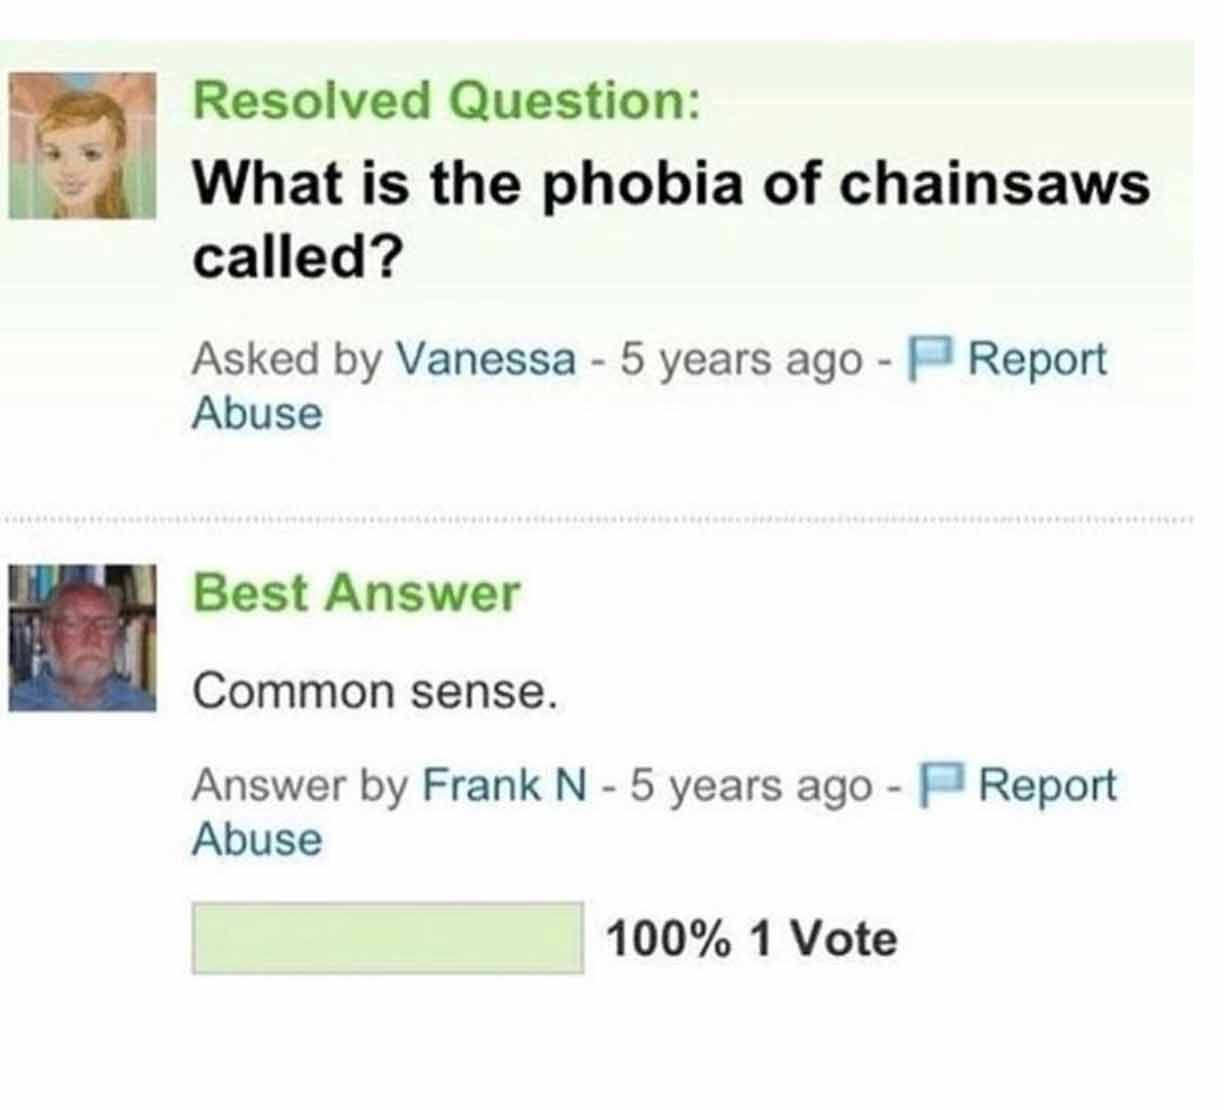 random phobia of chainsaws called - Resolved Question What is the phobia of chainsaws called? Asked by Vanessa 5 years ago Abuse Report Best Answer Common sense. Answer by Frank N 5 years ago Abuse Report 100% 1 Vote